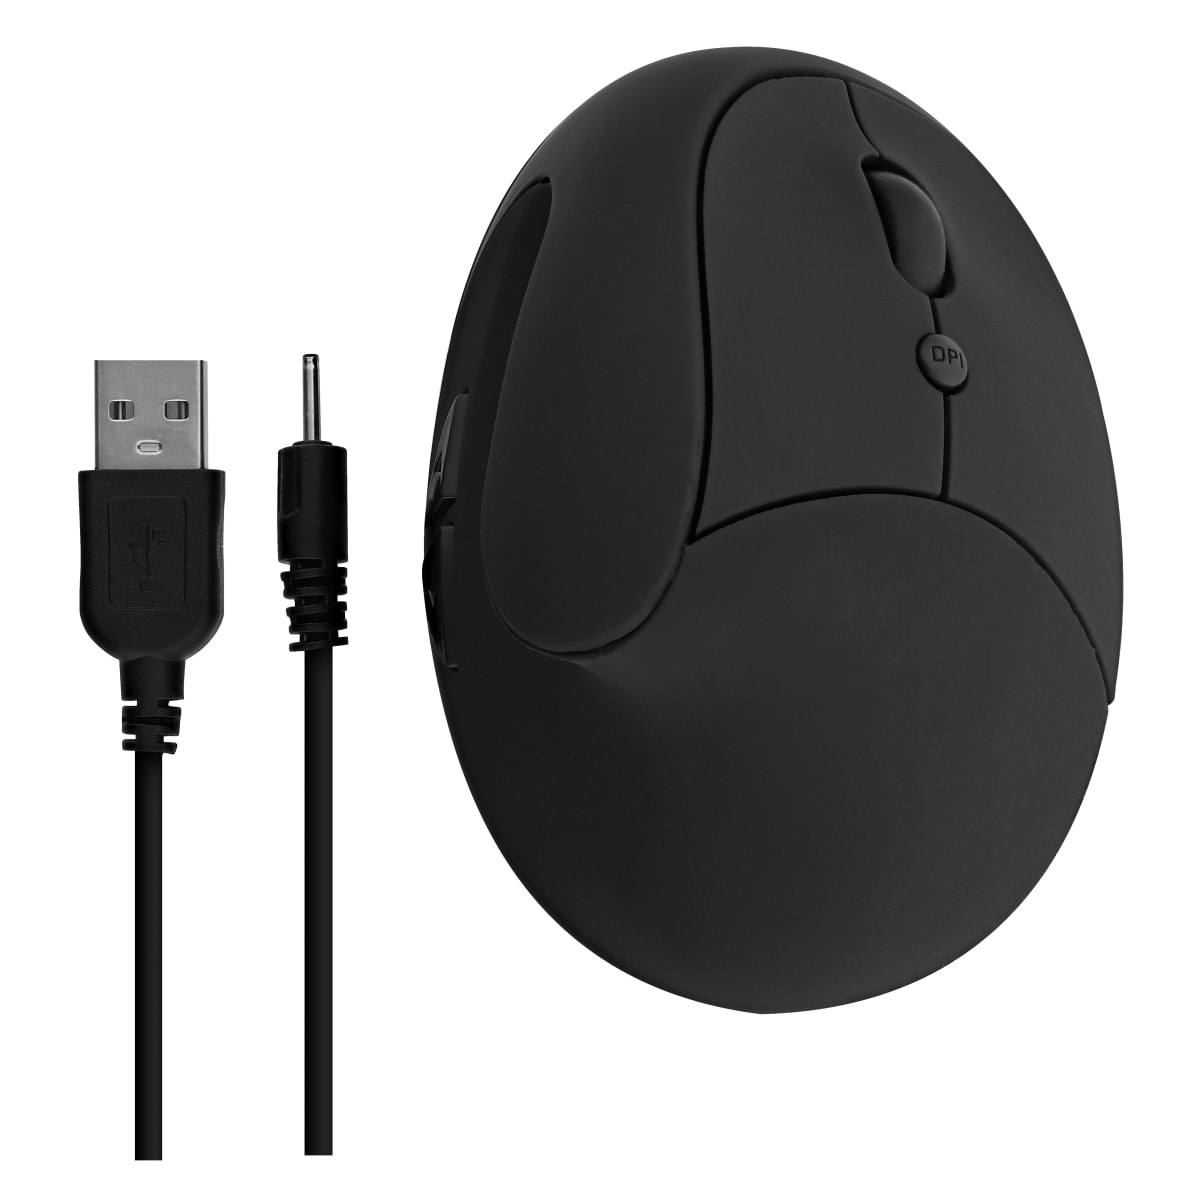 Mini ergonomic mouse with integrated battery